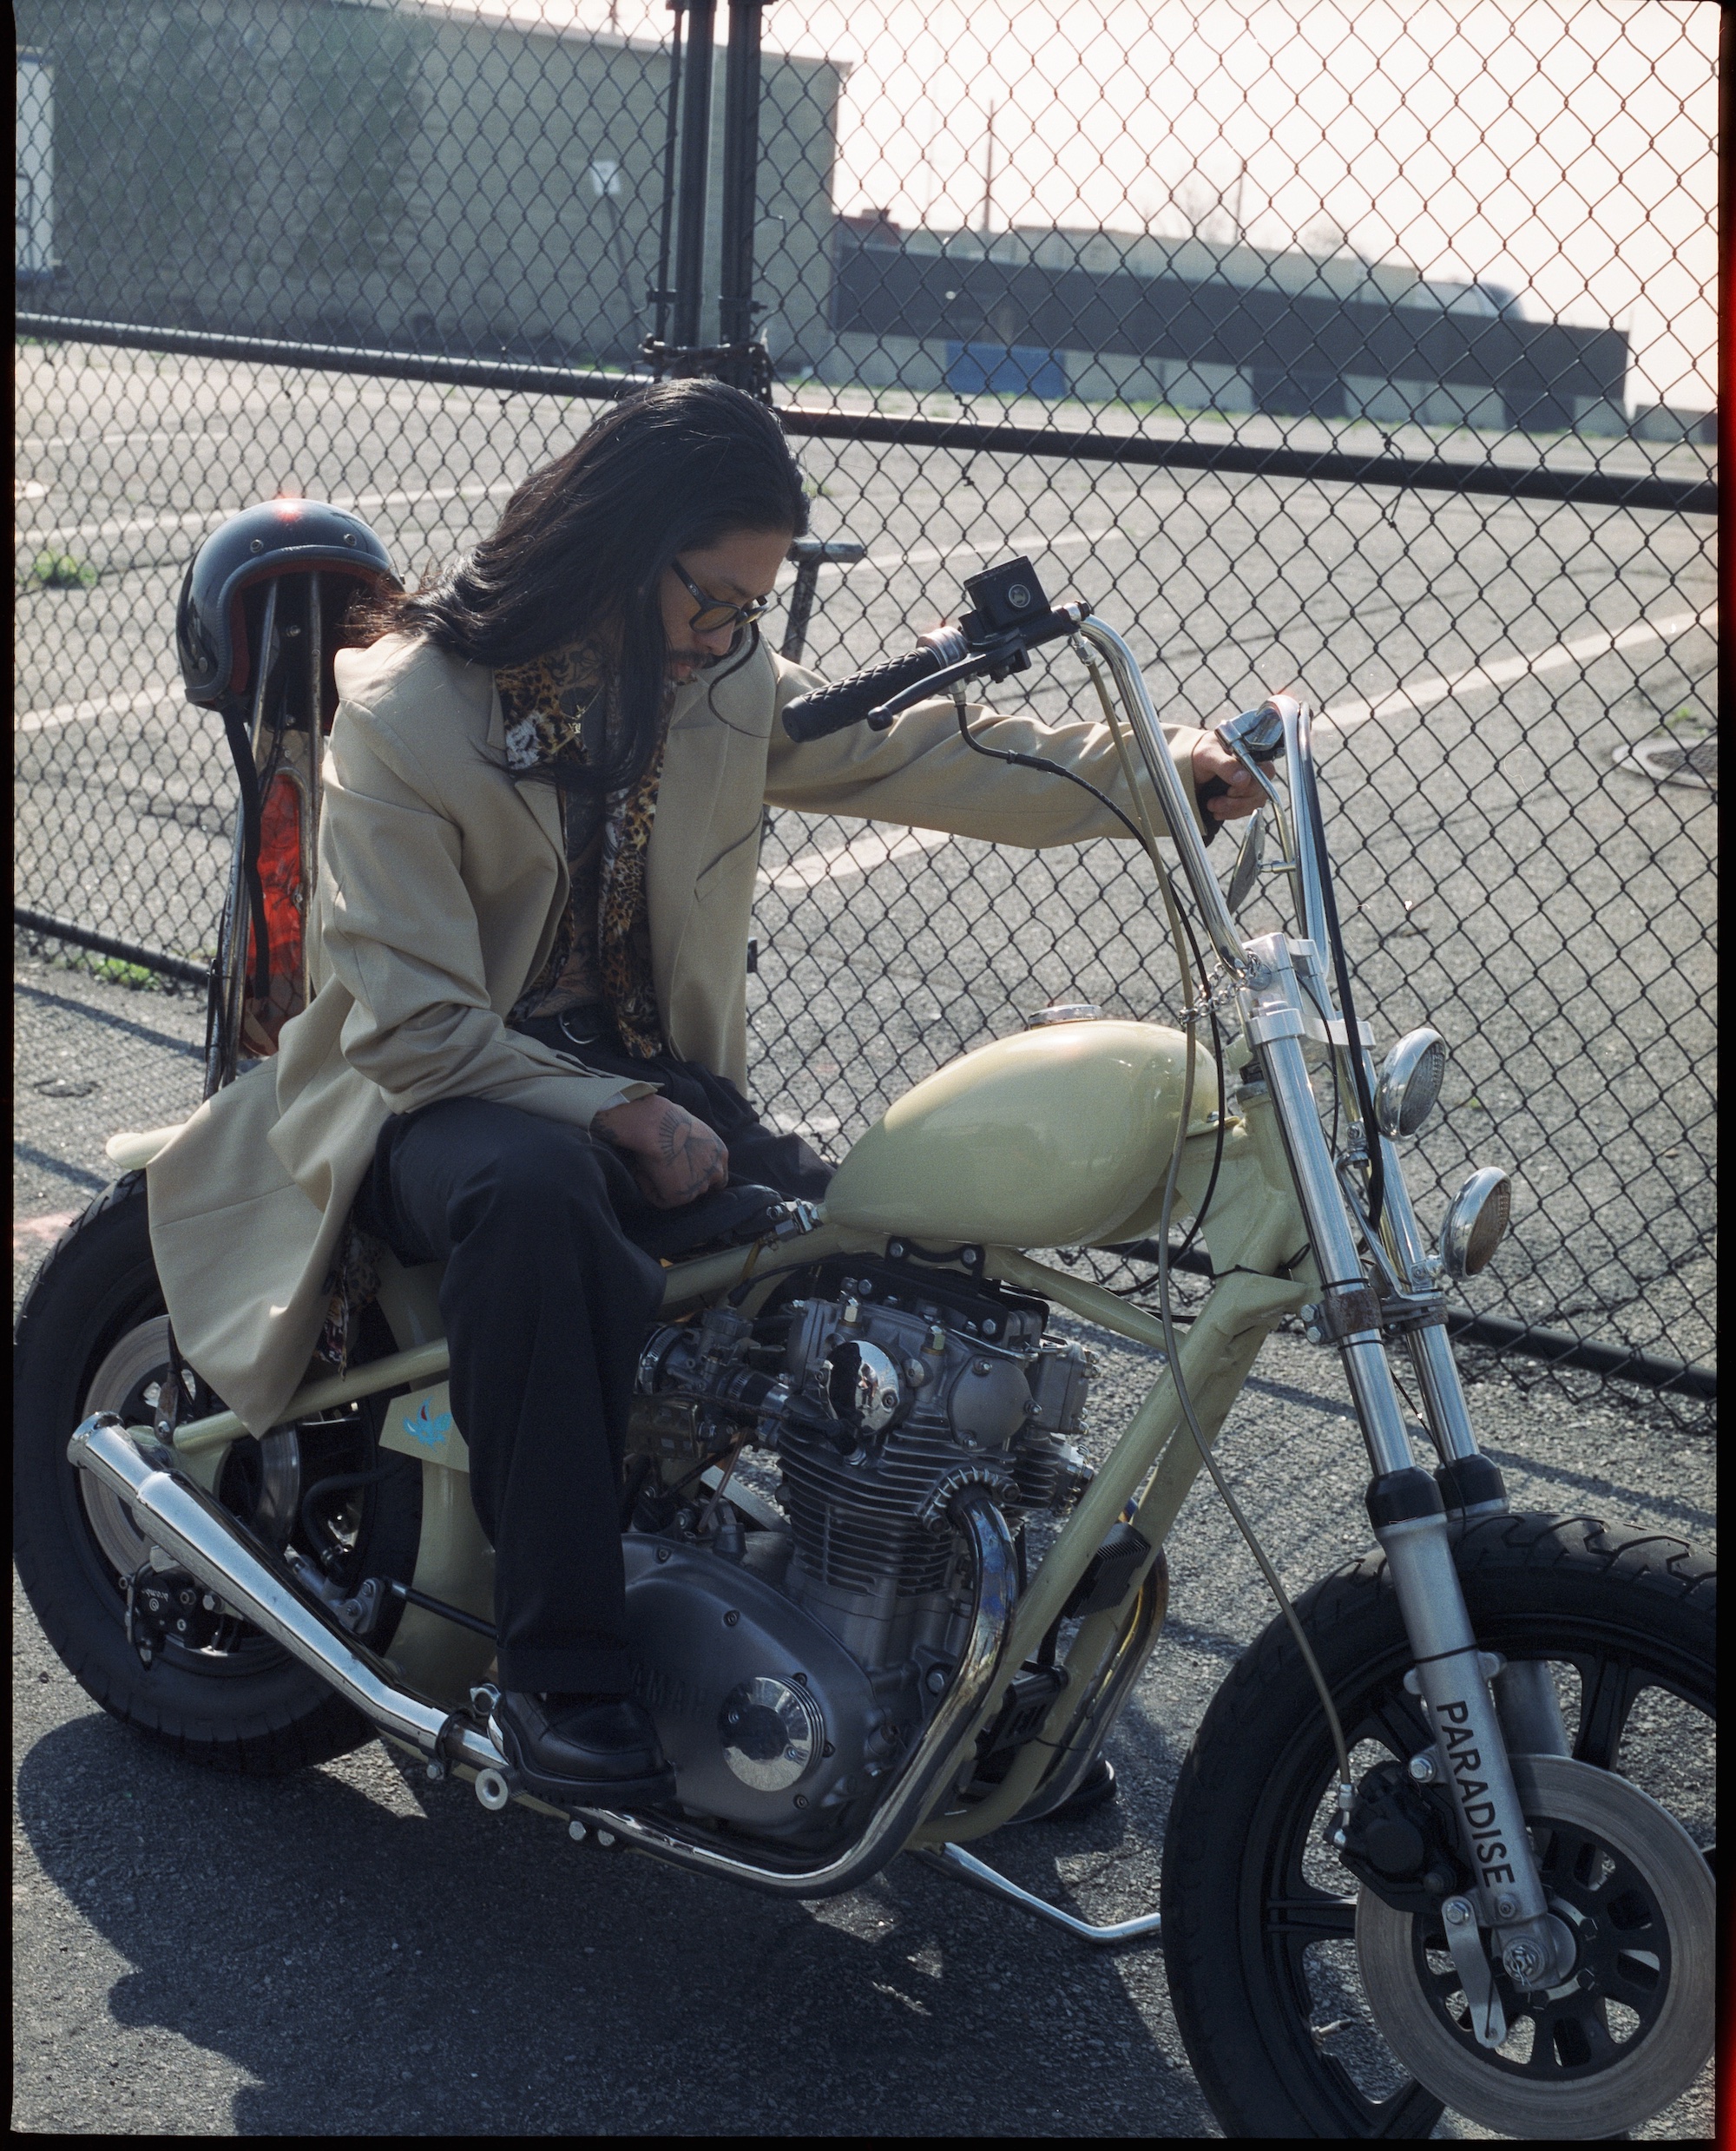 jae kim posing on a motorcycle in front of a chain link fence